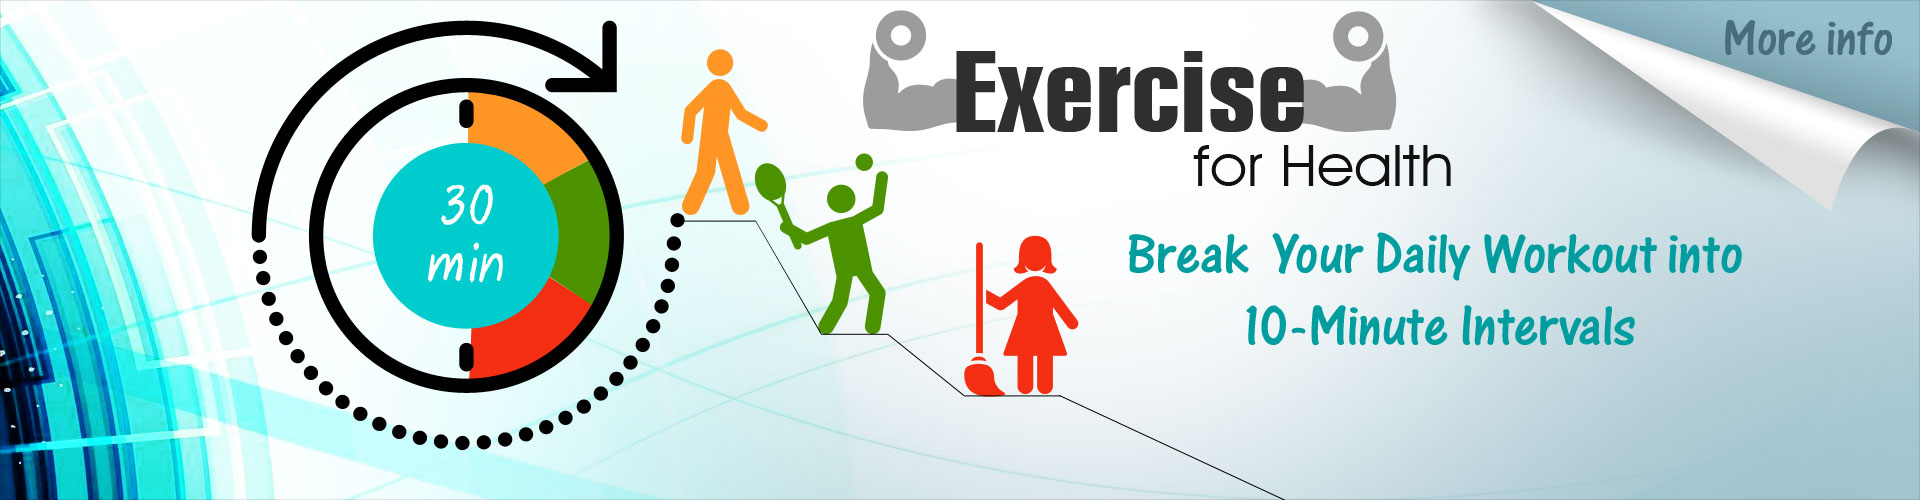 Exercise for Health - Break Your Daily Workouts into 10-minute Intervals